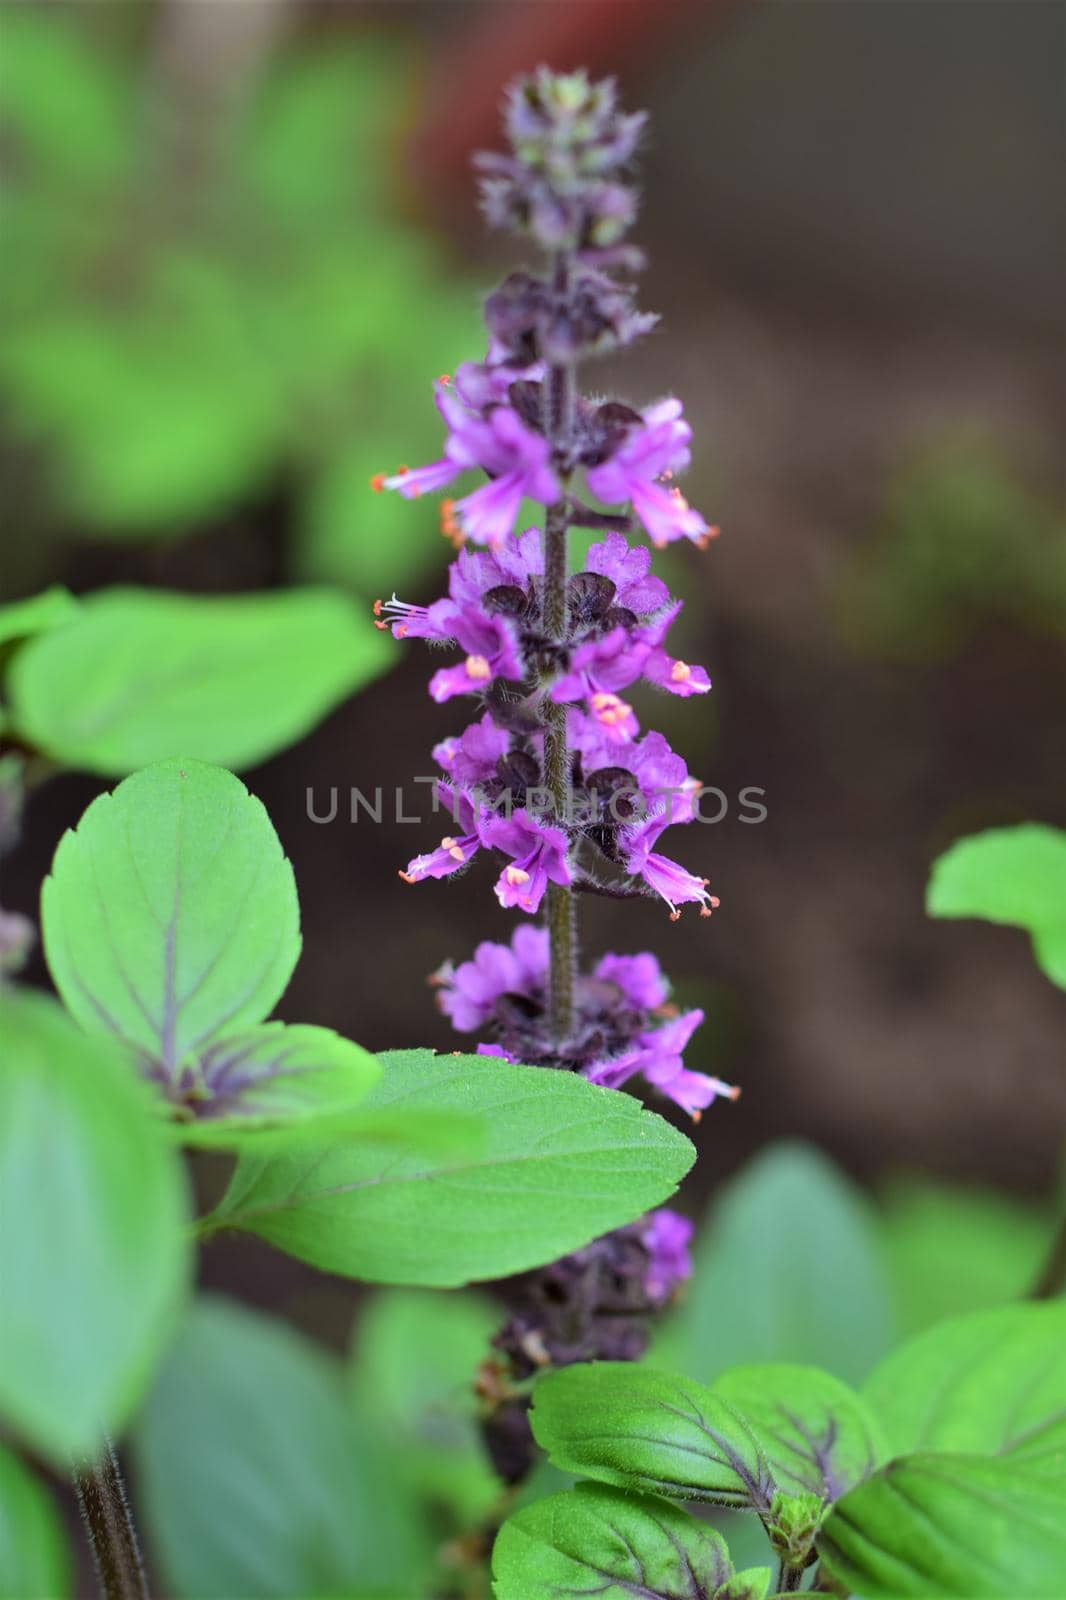 Close-up of a flowering shrub basil against a blurred background